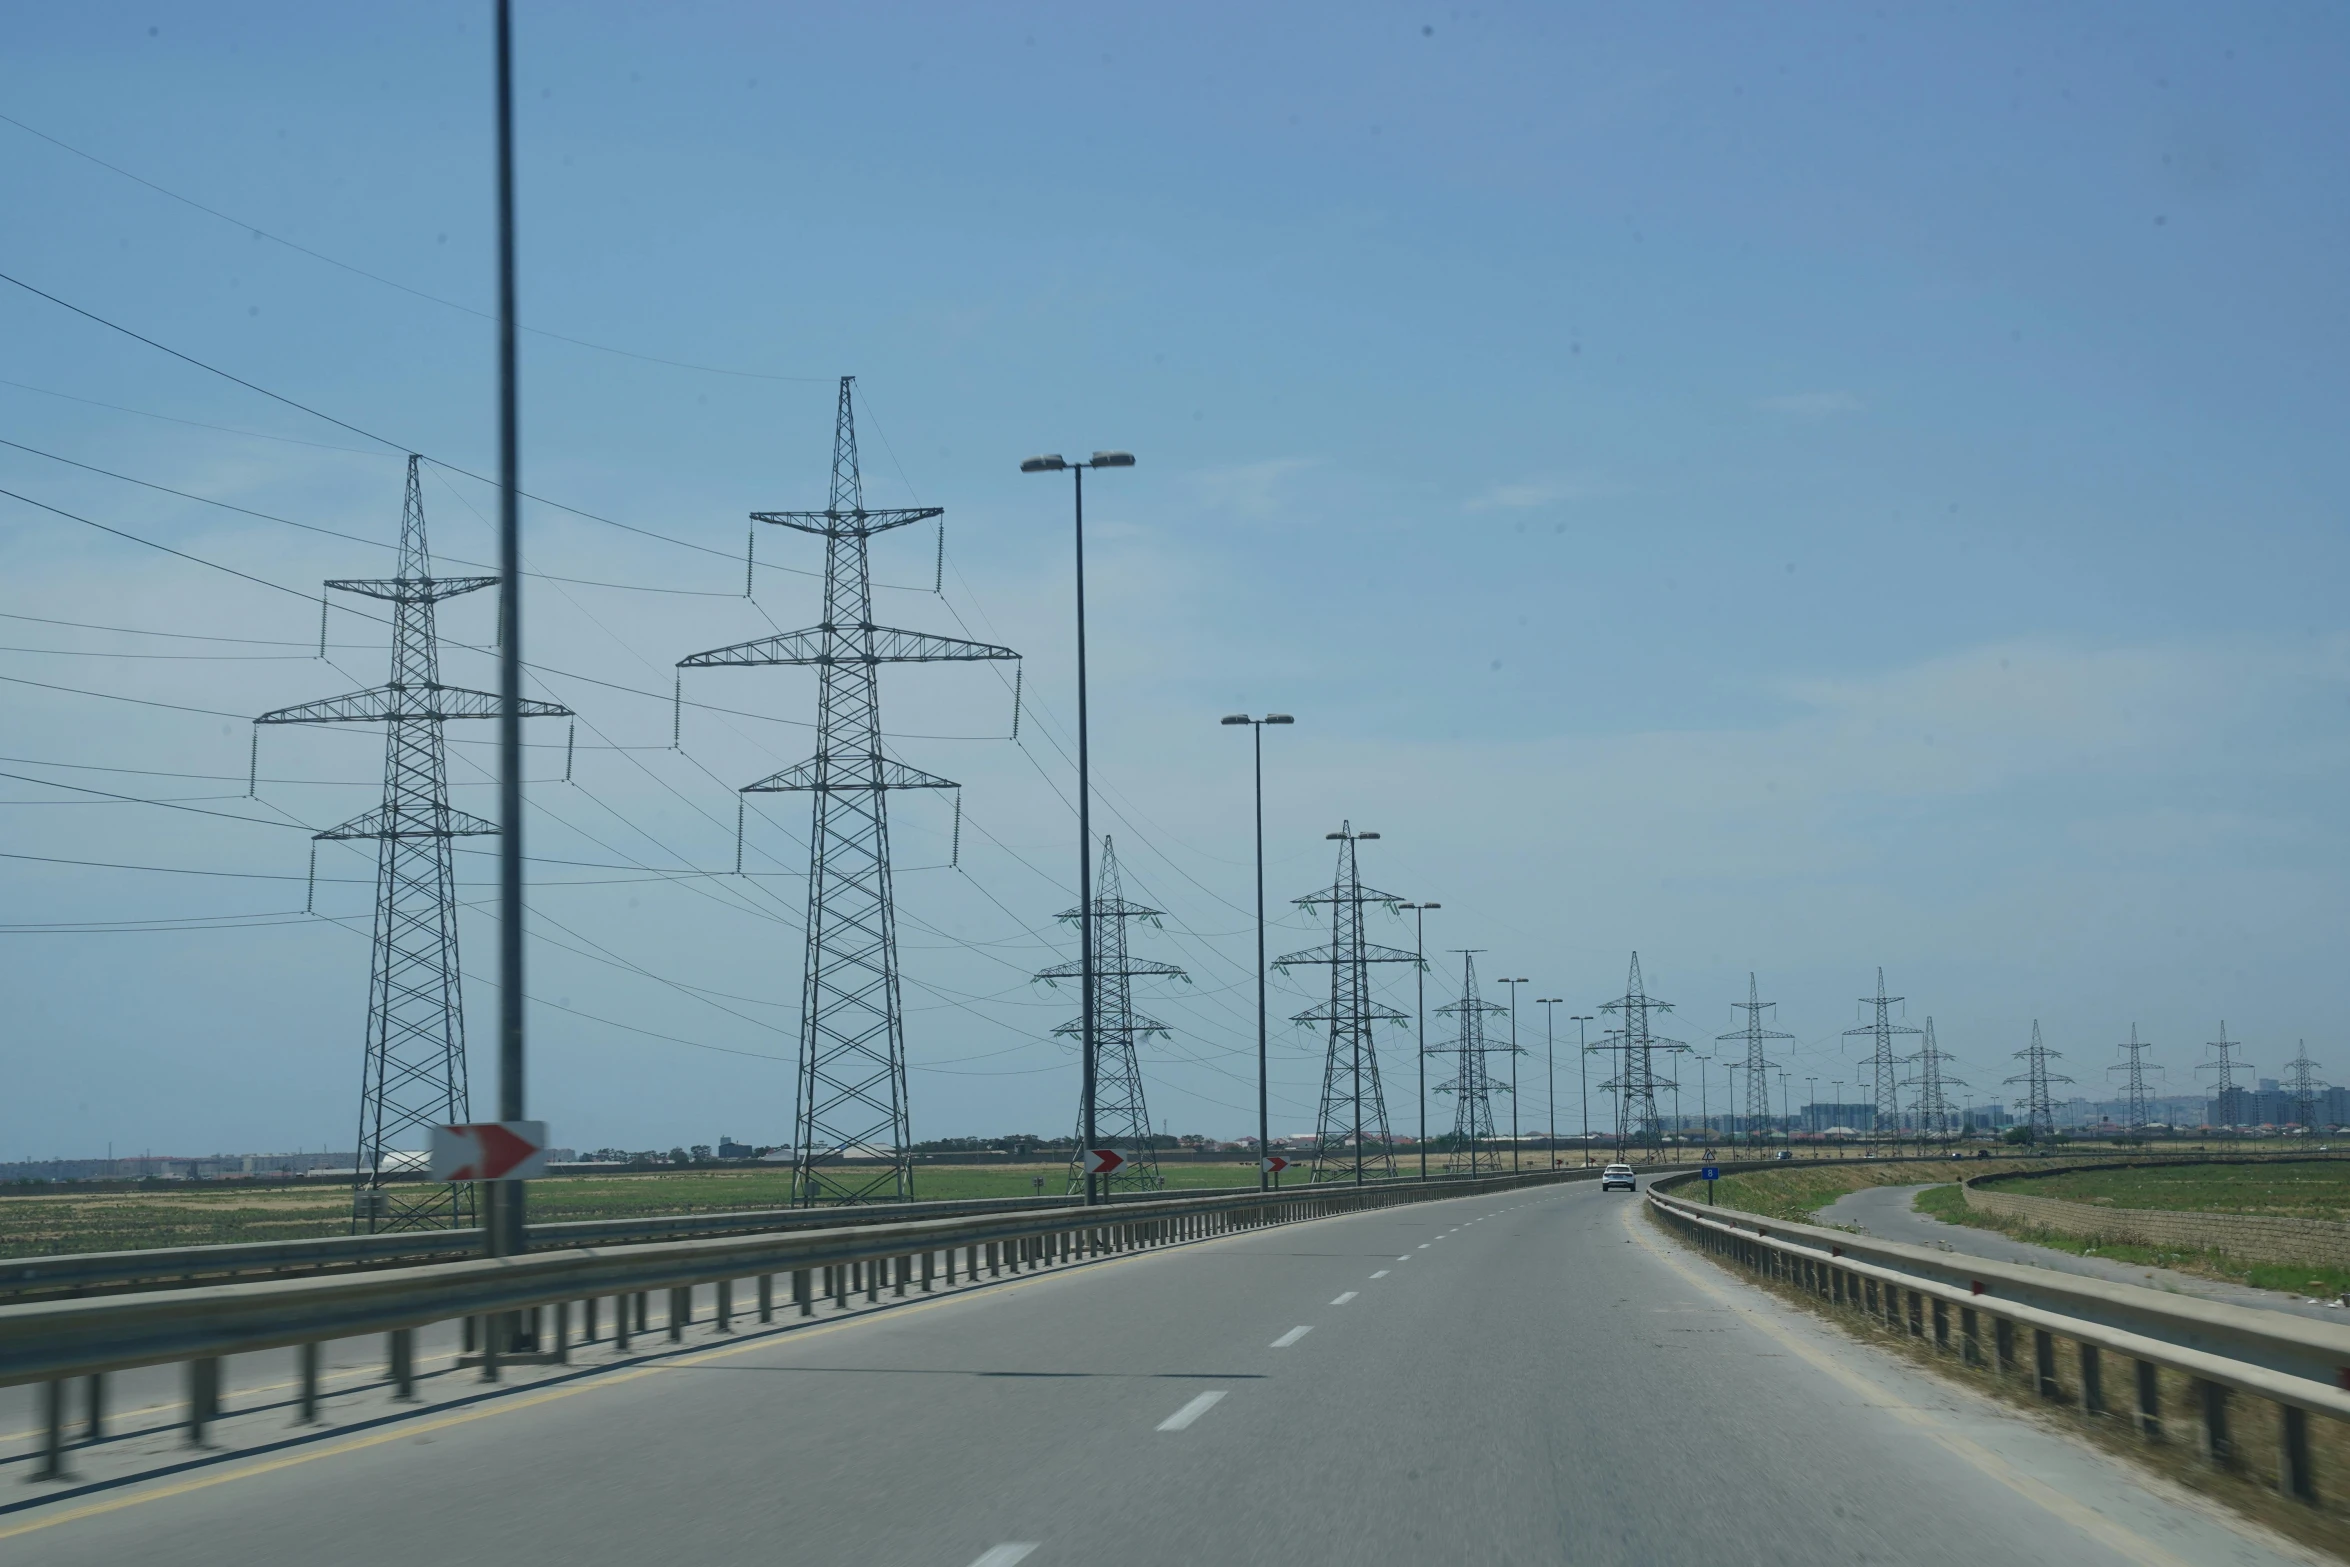 the view from a vehicle on the highway showing a bunch of wires